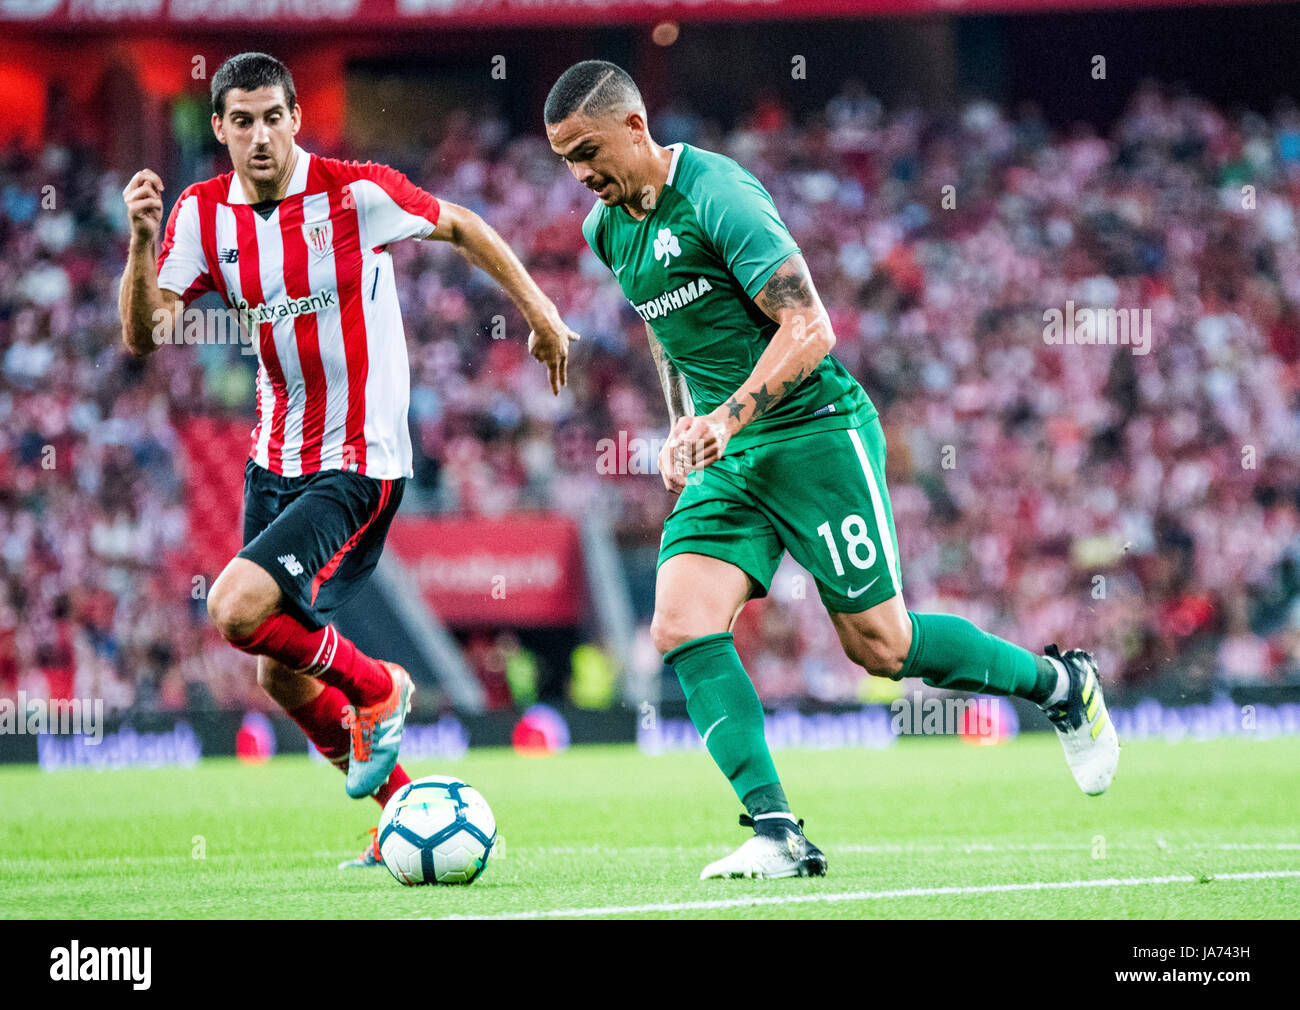 Bilbao, Spain. 24th Aug, 2017. Luciano da Rocha Neves (Forward, Panathinaikos FC) in action during the football match of 3rd leg of third qualifying round of 2017/2018 UEFA Europa League between Athletic Club and Panathinaikos FC at San Mames Stadium on August 24, 2017 in Bilbao, Spain. Credit: David Gato/Alamy Live News Stock Photo